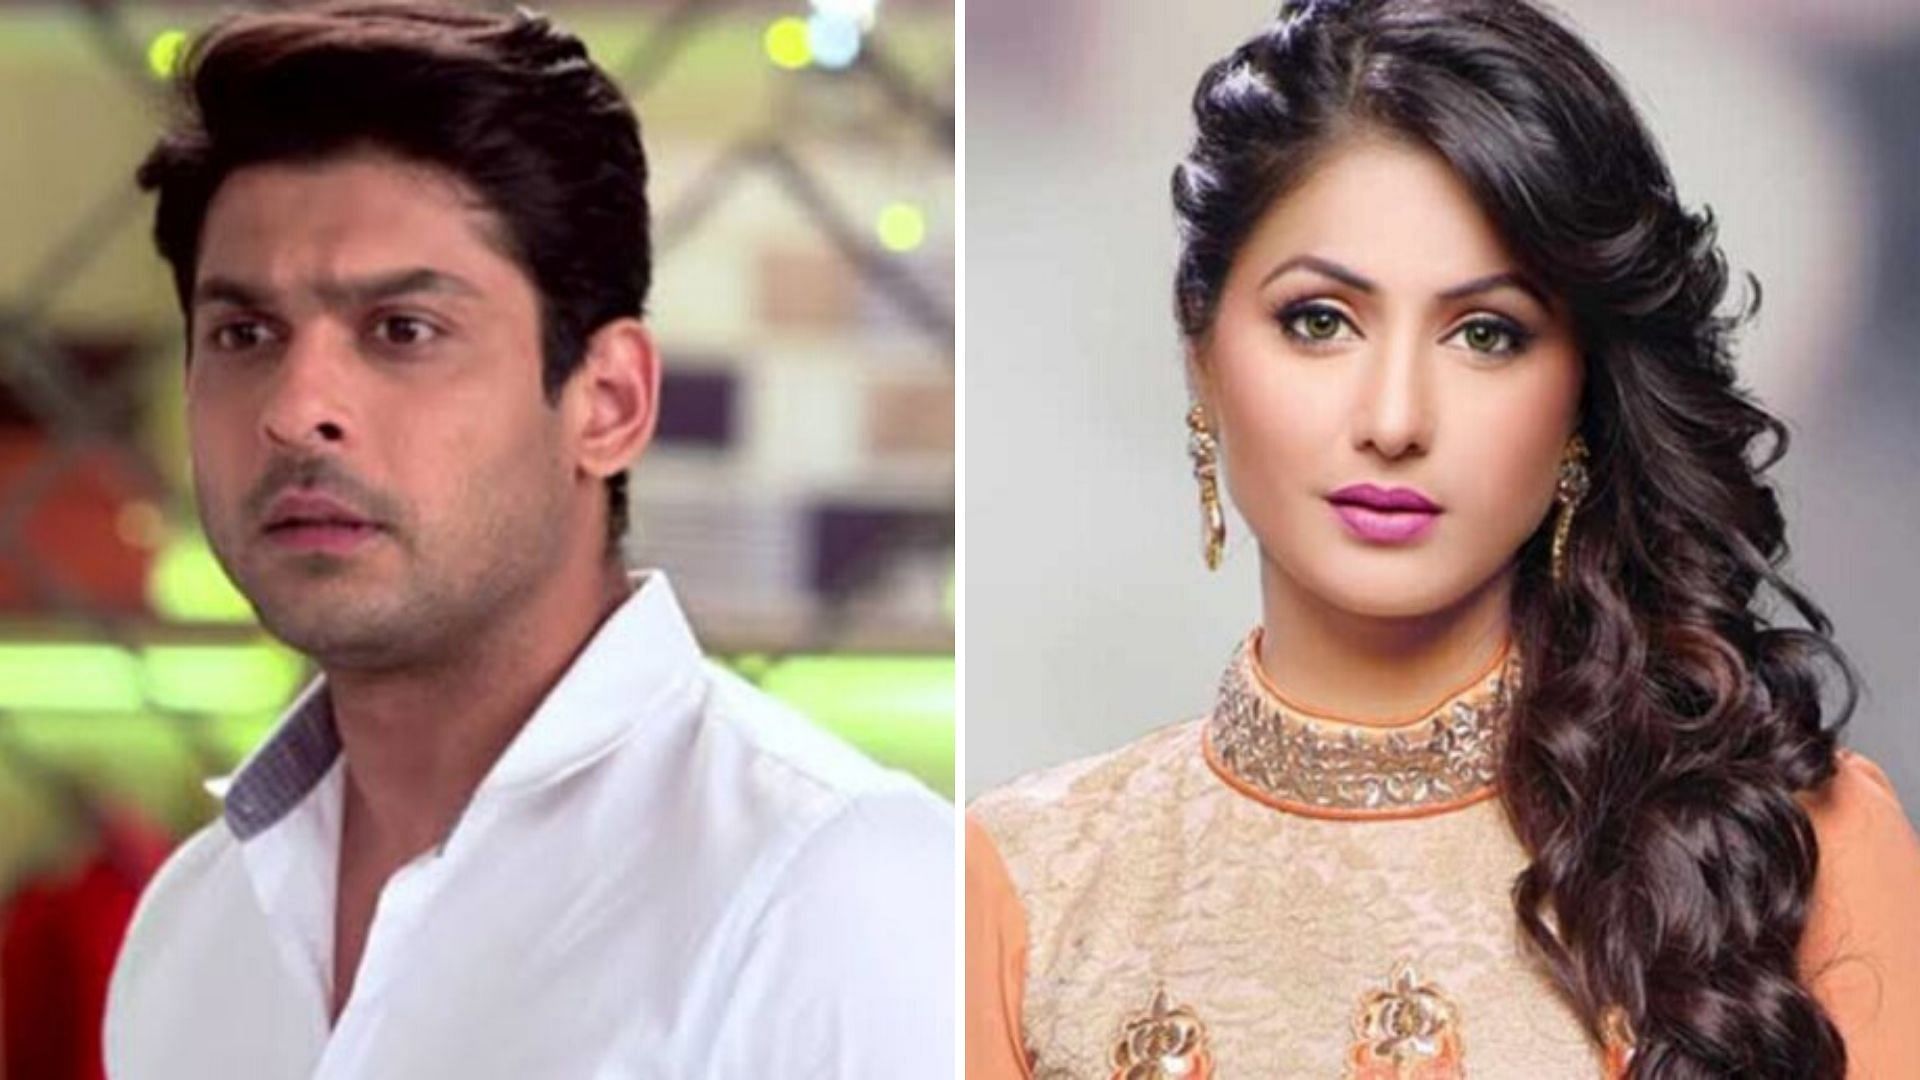 Former Bigg Boss contestants Sidharth Shukla, Hina Khan will reportedly be a part of Bigg Boss 14 as well.